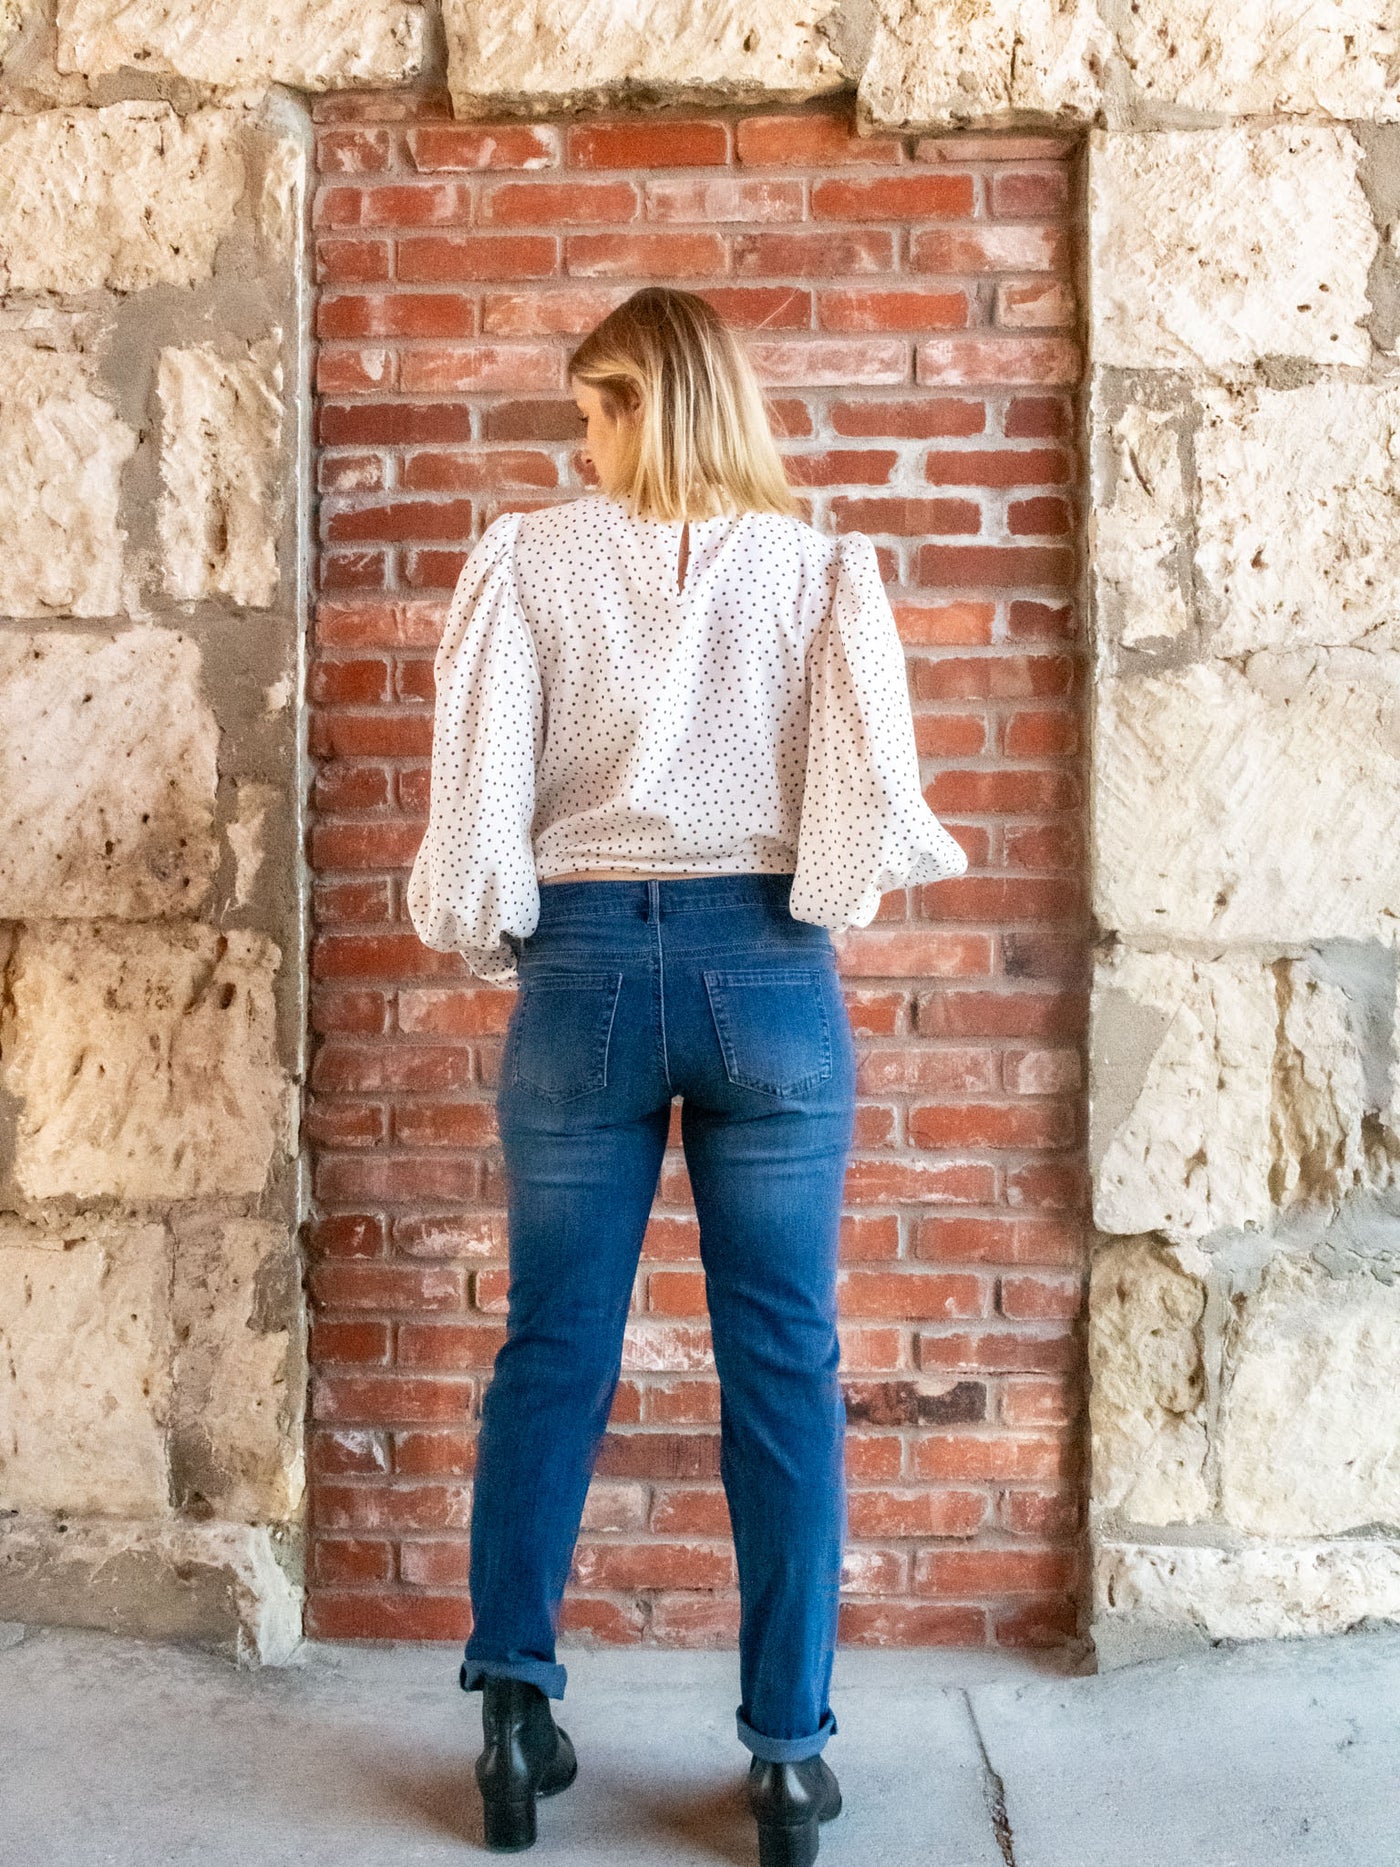 A model wearing a pair of mid wash jeans. The model has it paired with a white polka dot top and black booties.